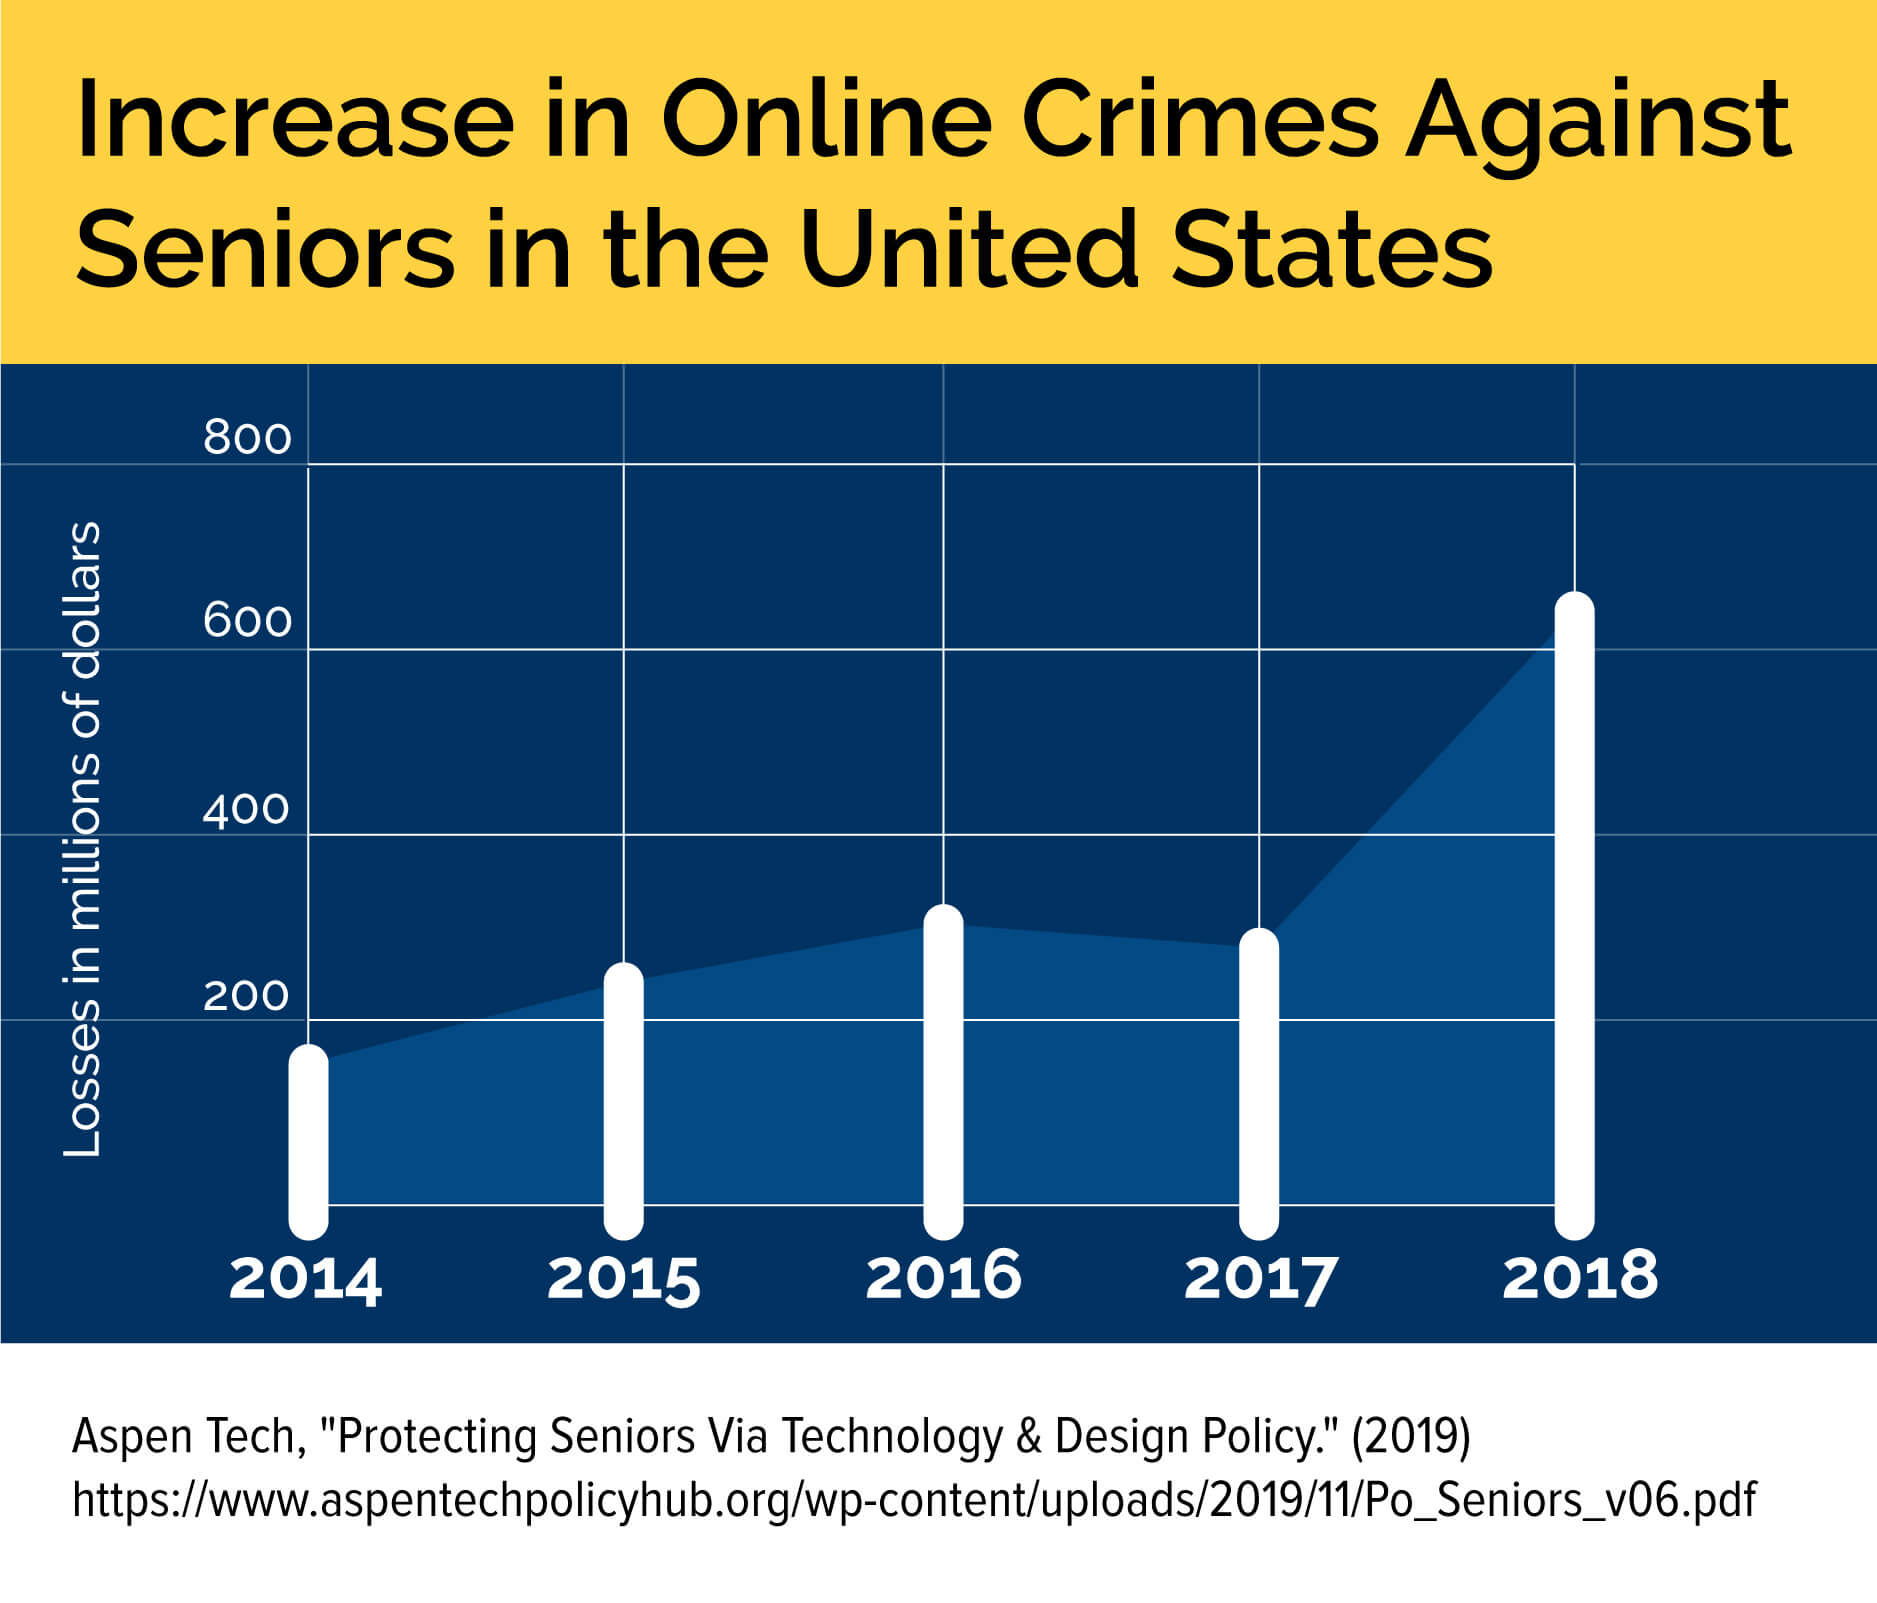 A graph showing the recent increase in online crimes against older adults in the United States.